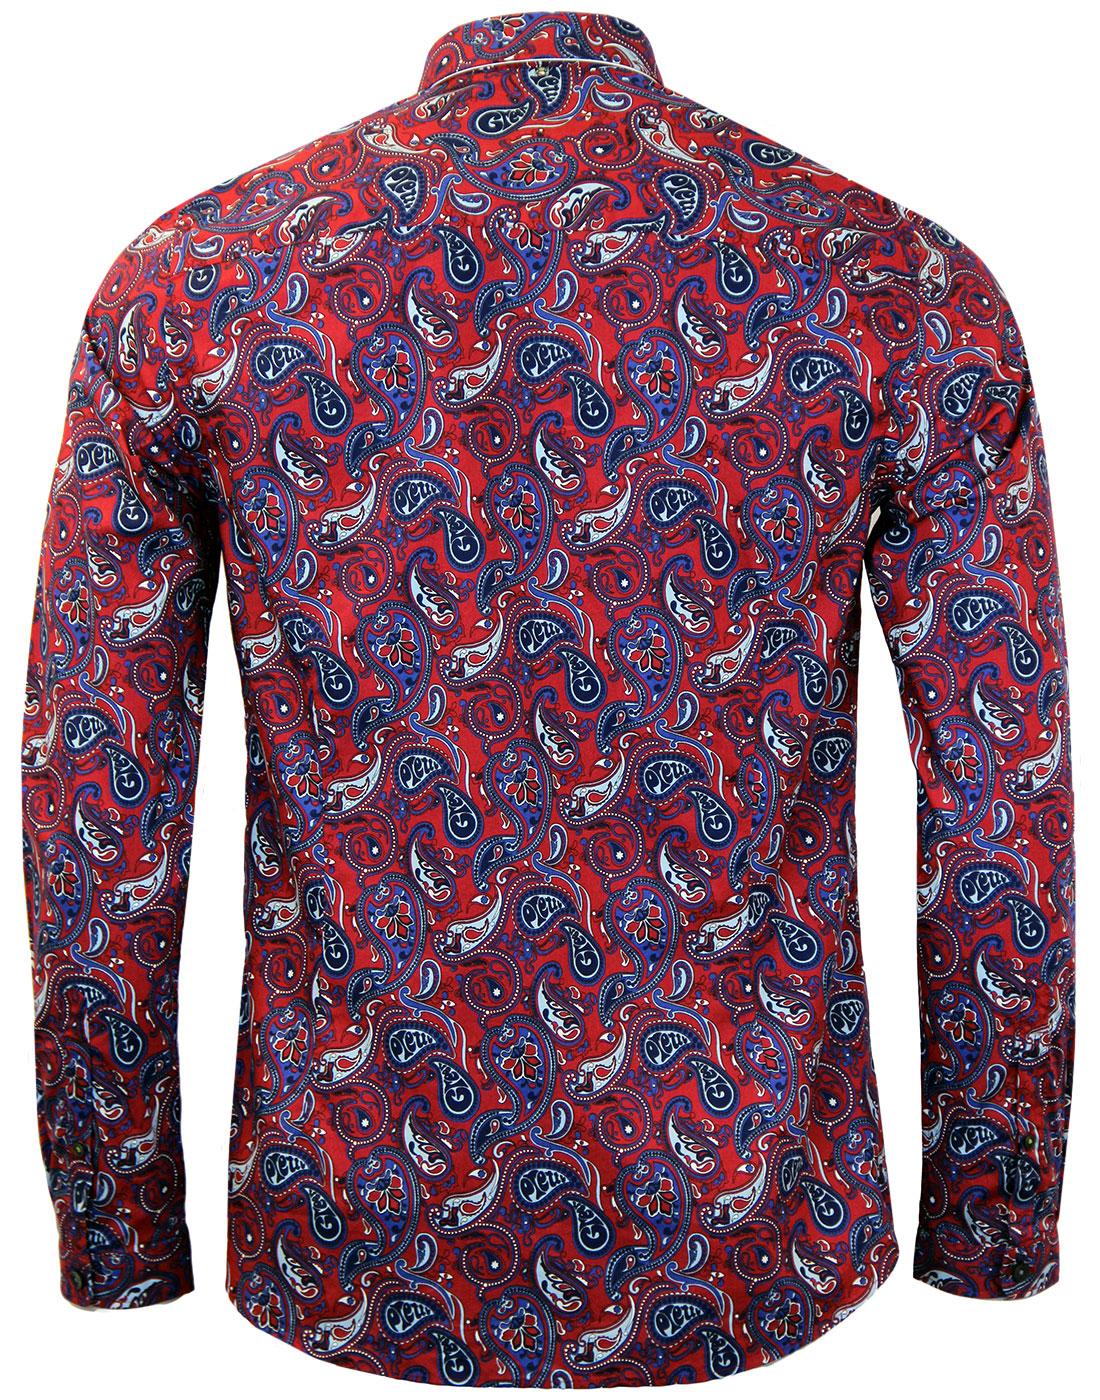 PRETTY GREEN Sefton Retro Mod Psychedelic Paisley Shirt in Red